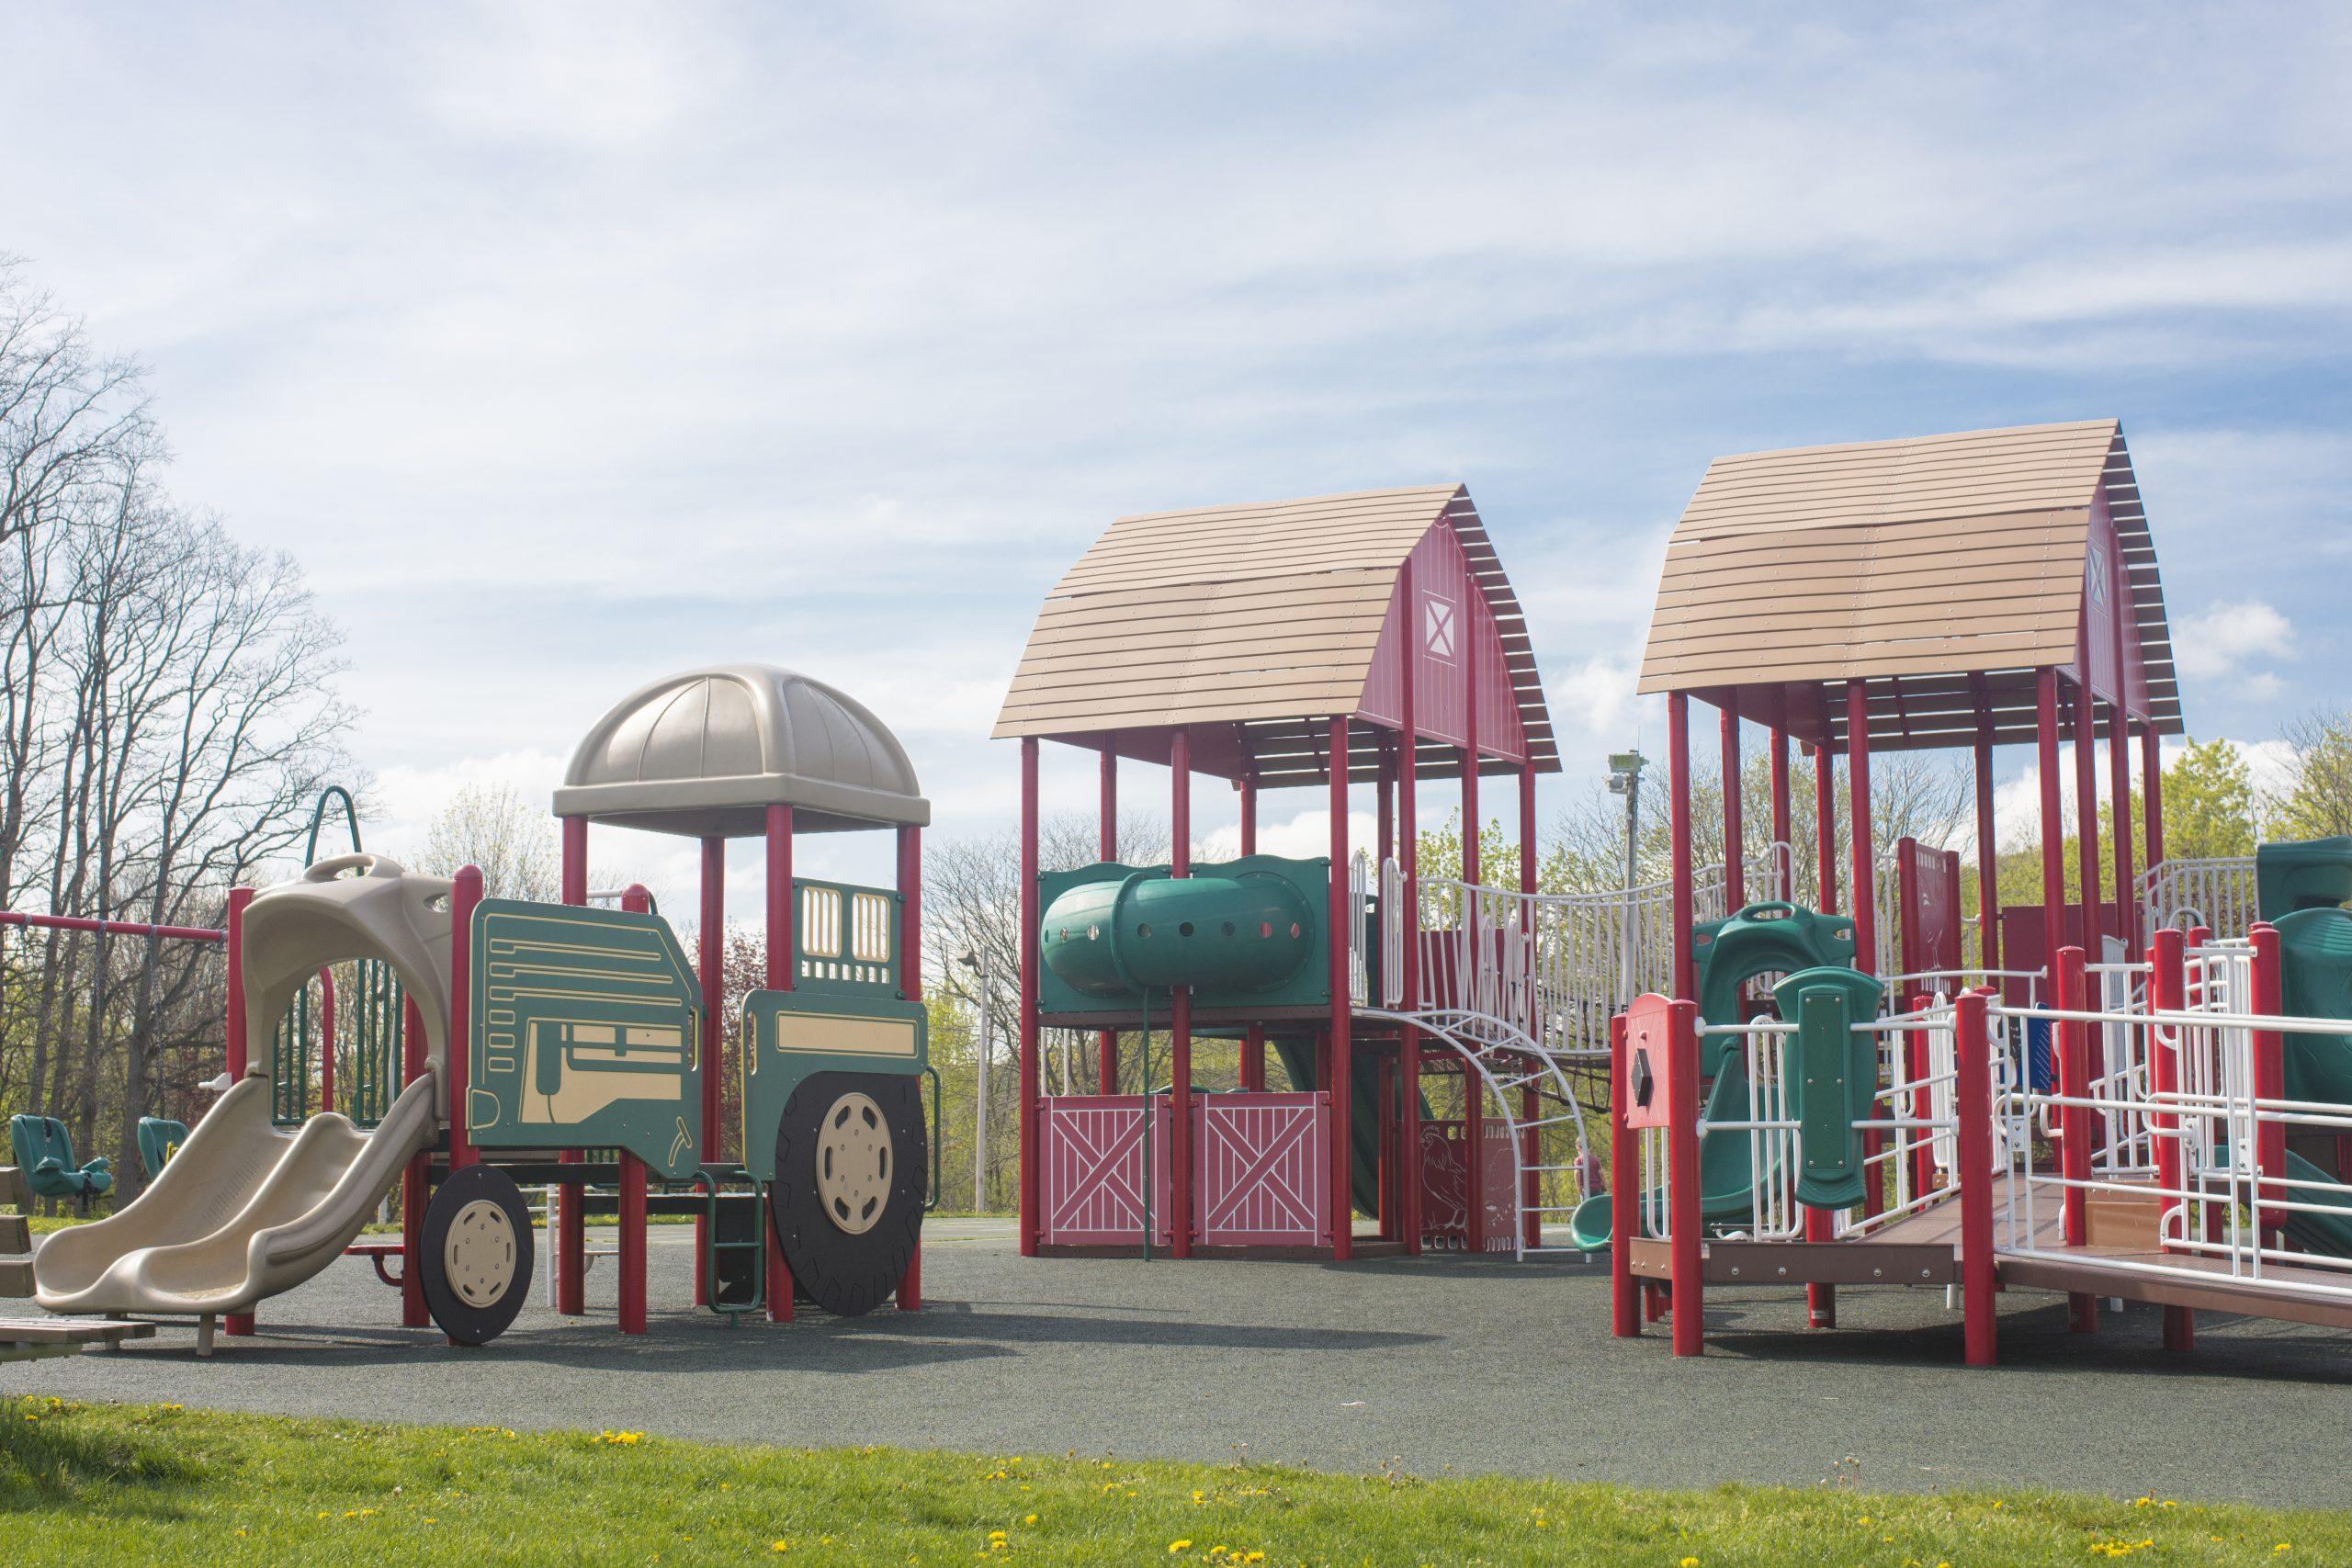 Playground: Barnyard themed structure with ramps and tractor